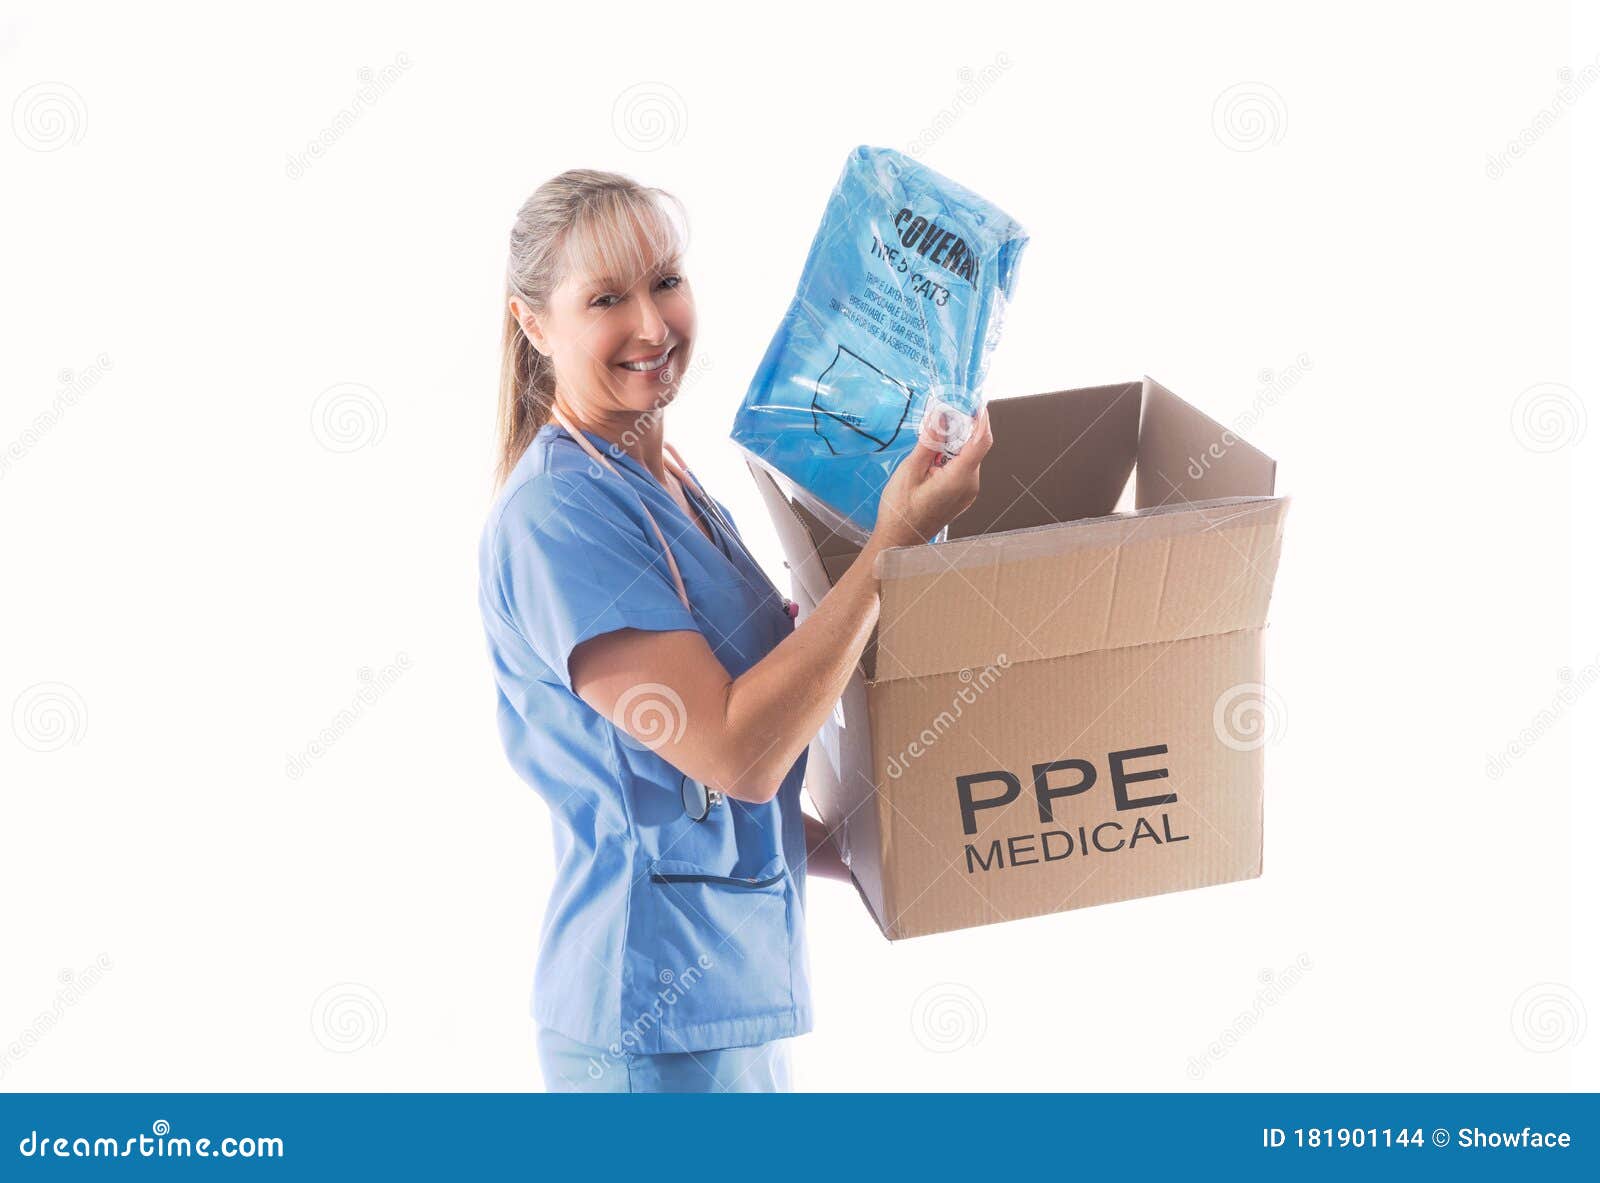 nurse or doctor holding a category 3 coverall ppe for infection control